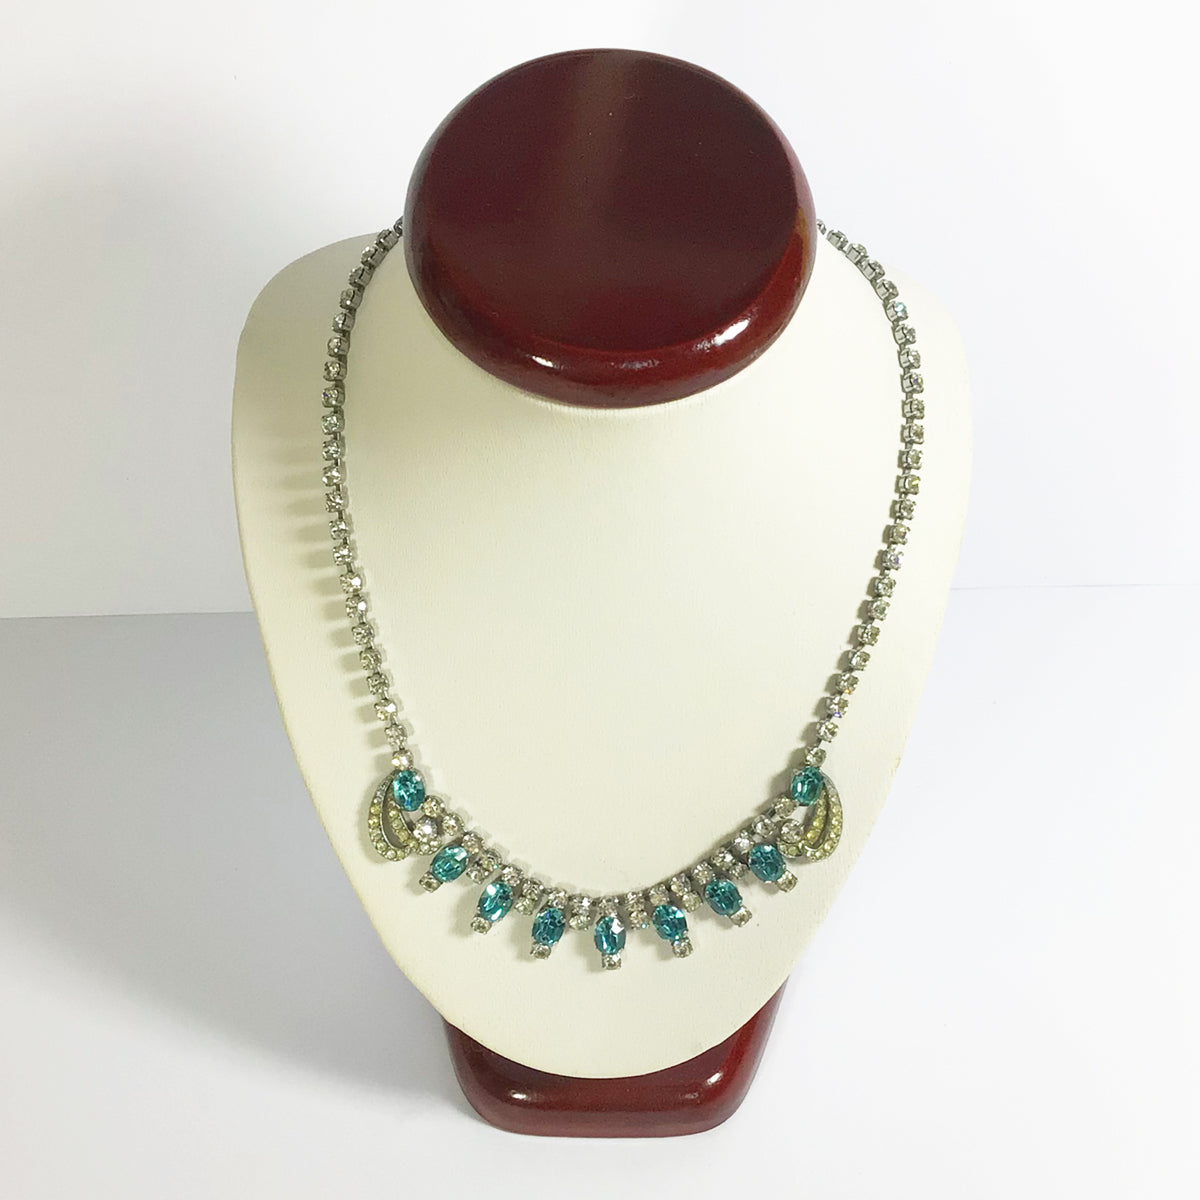 Schoffel & Co Vintage crystal and aqua necklace choker